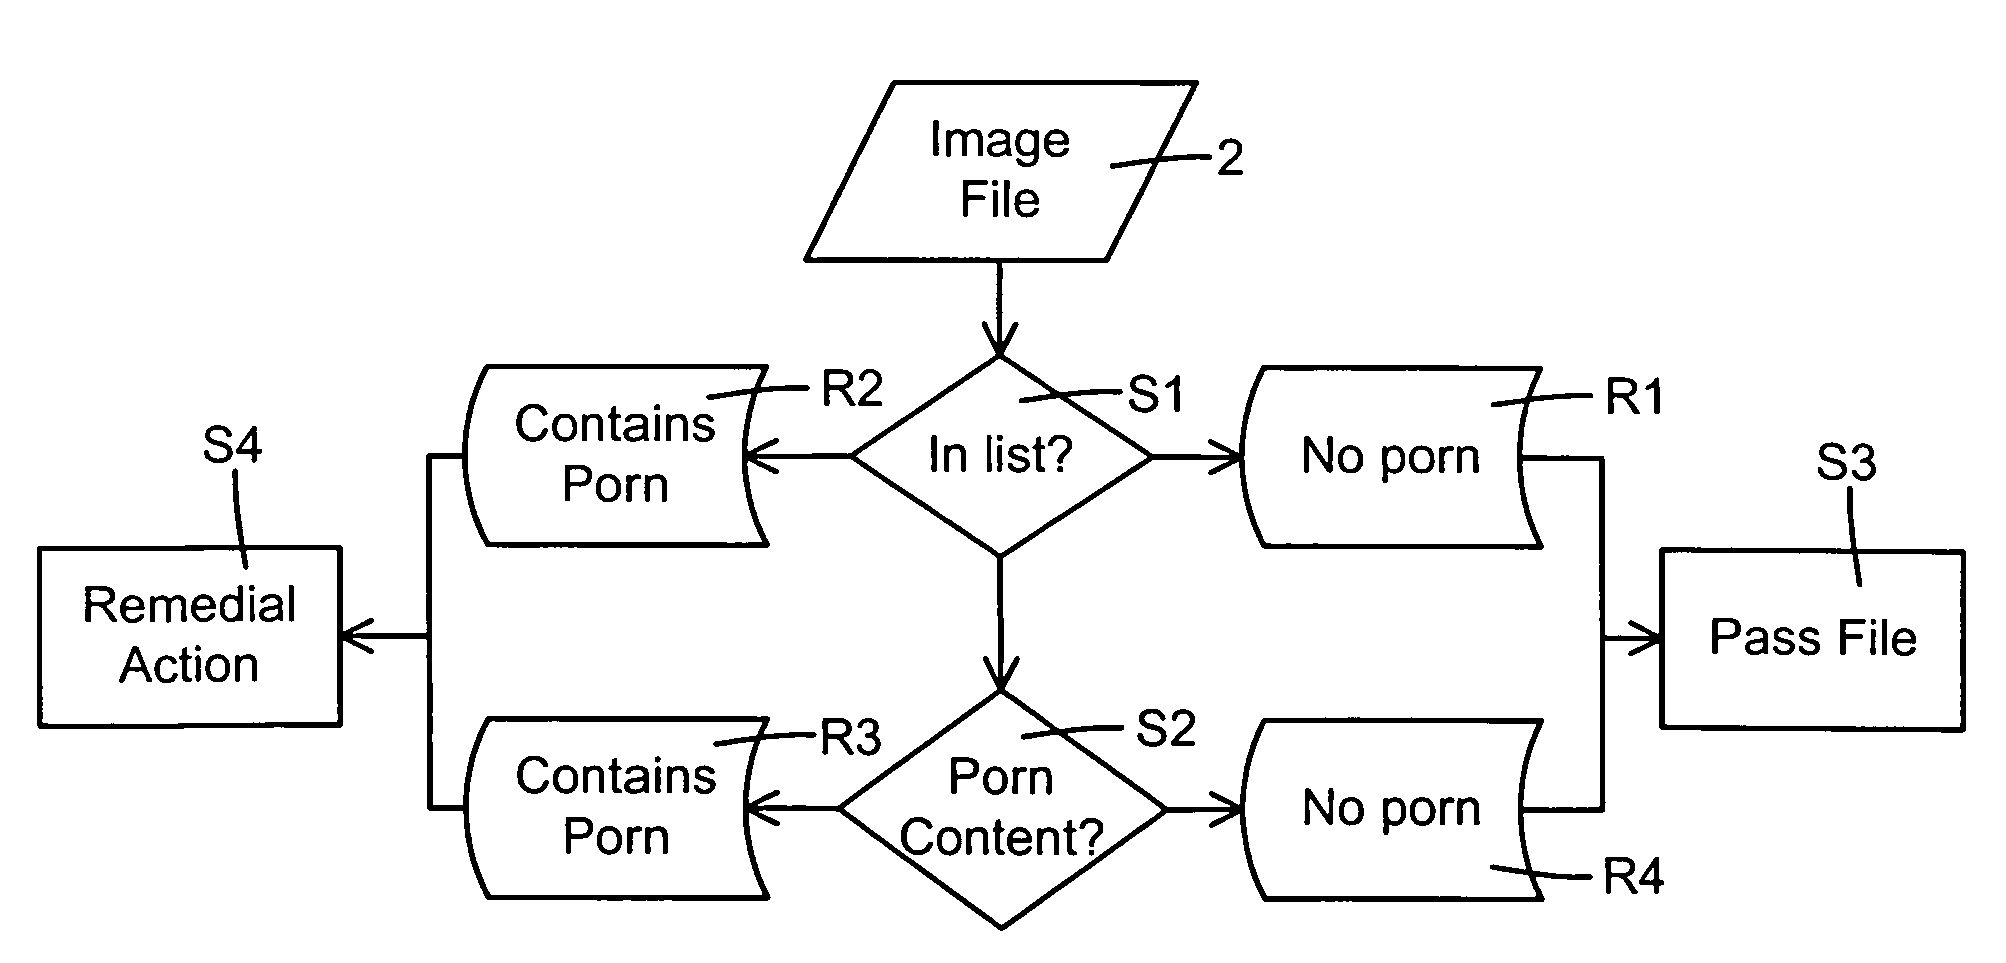 Scanning images for pornography